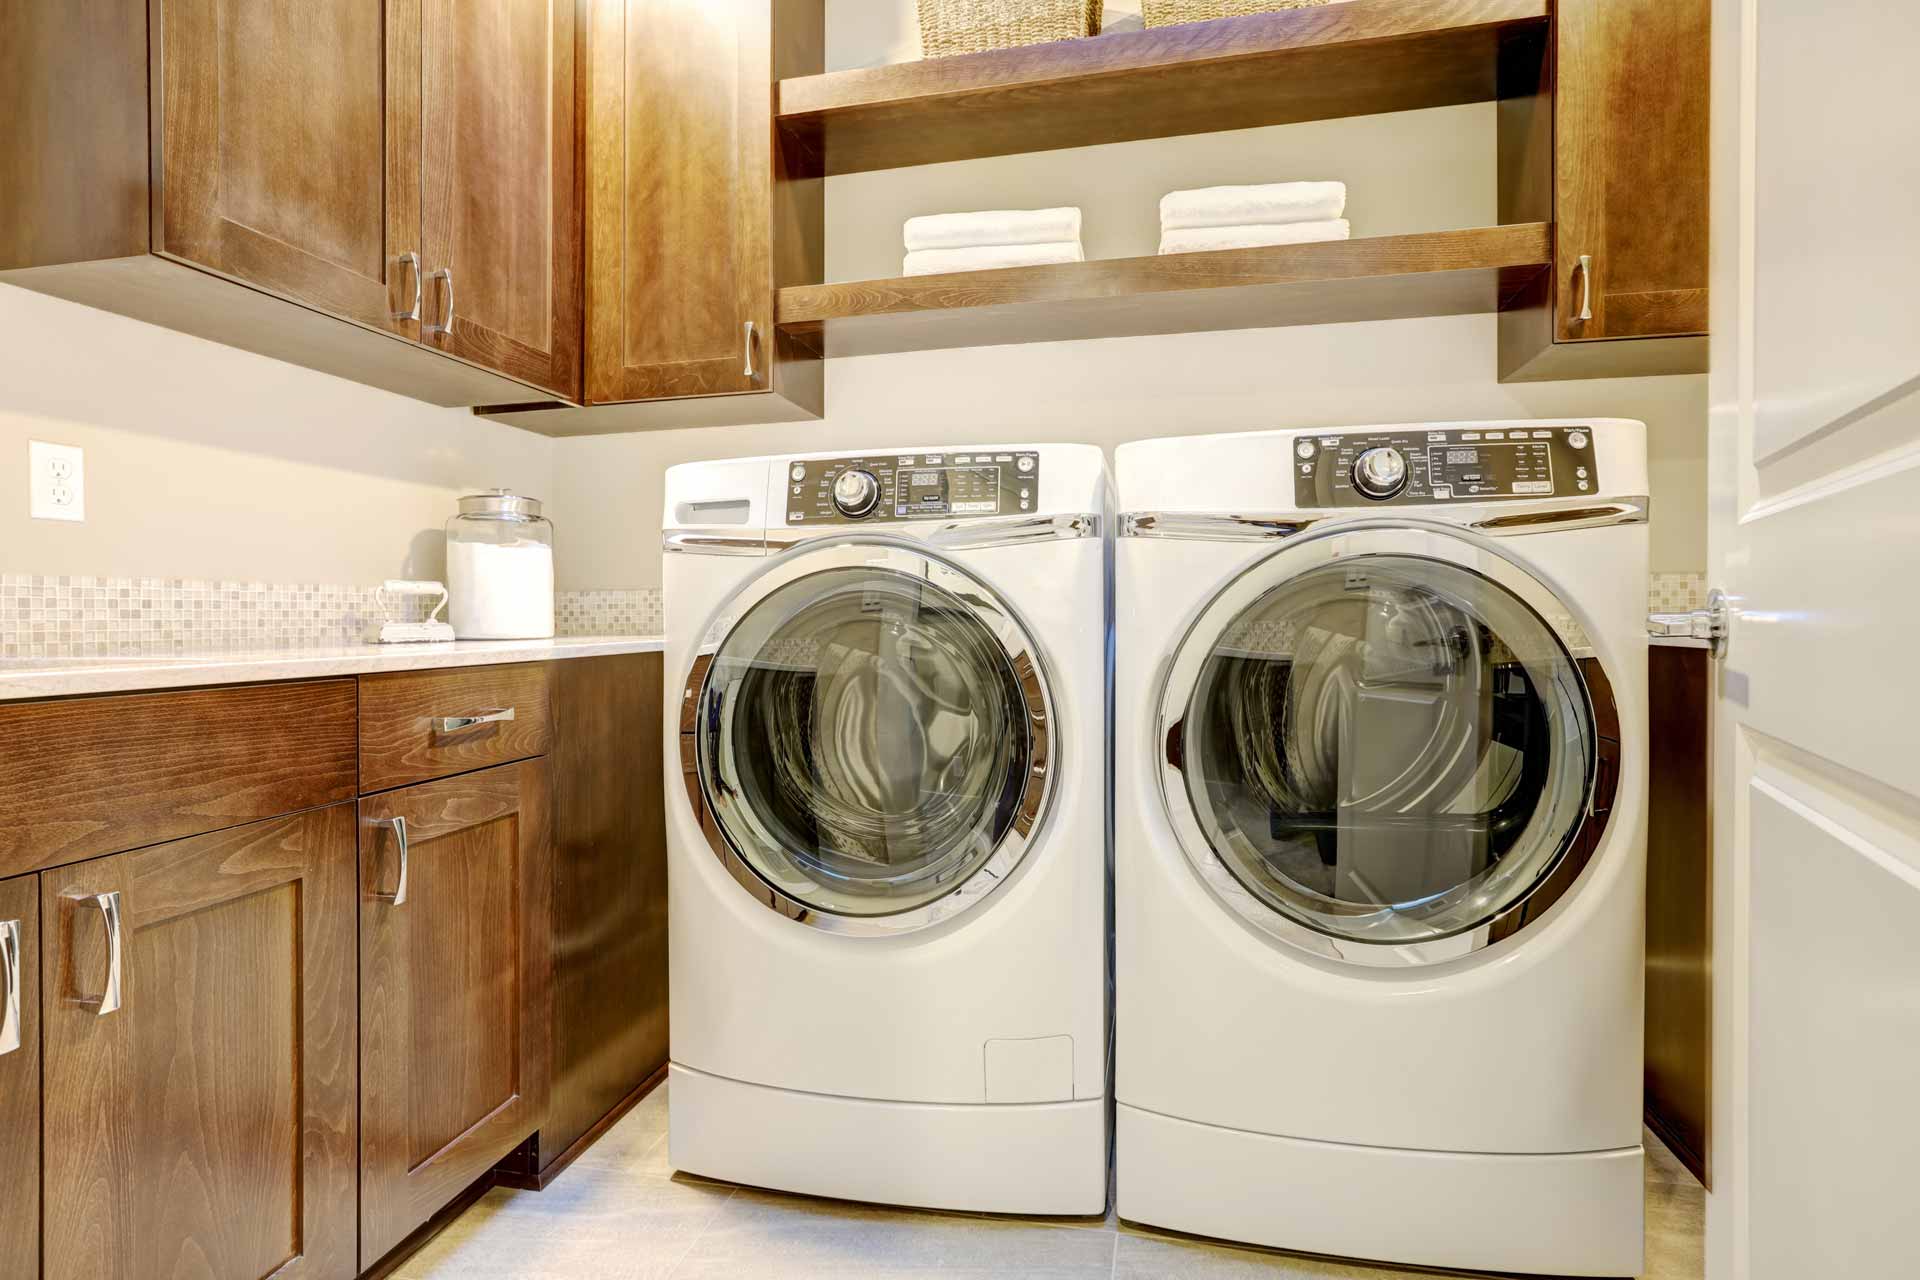 Washer/dryer set in laundry room